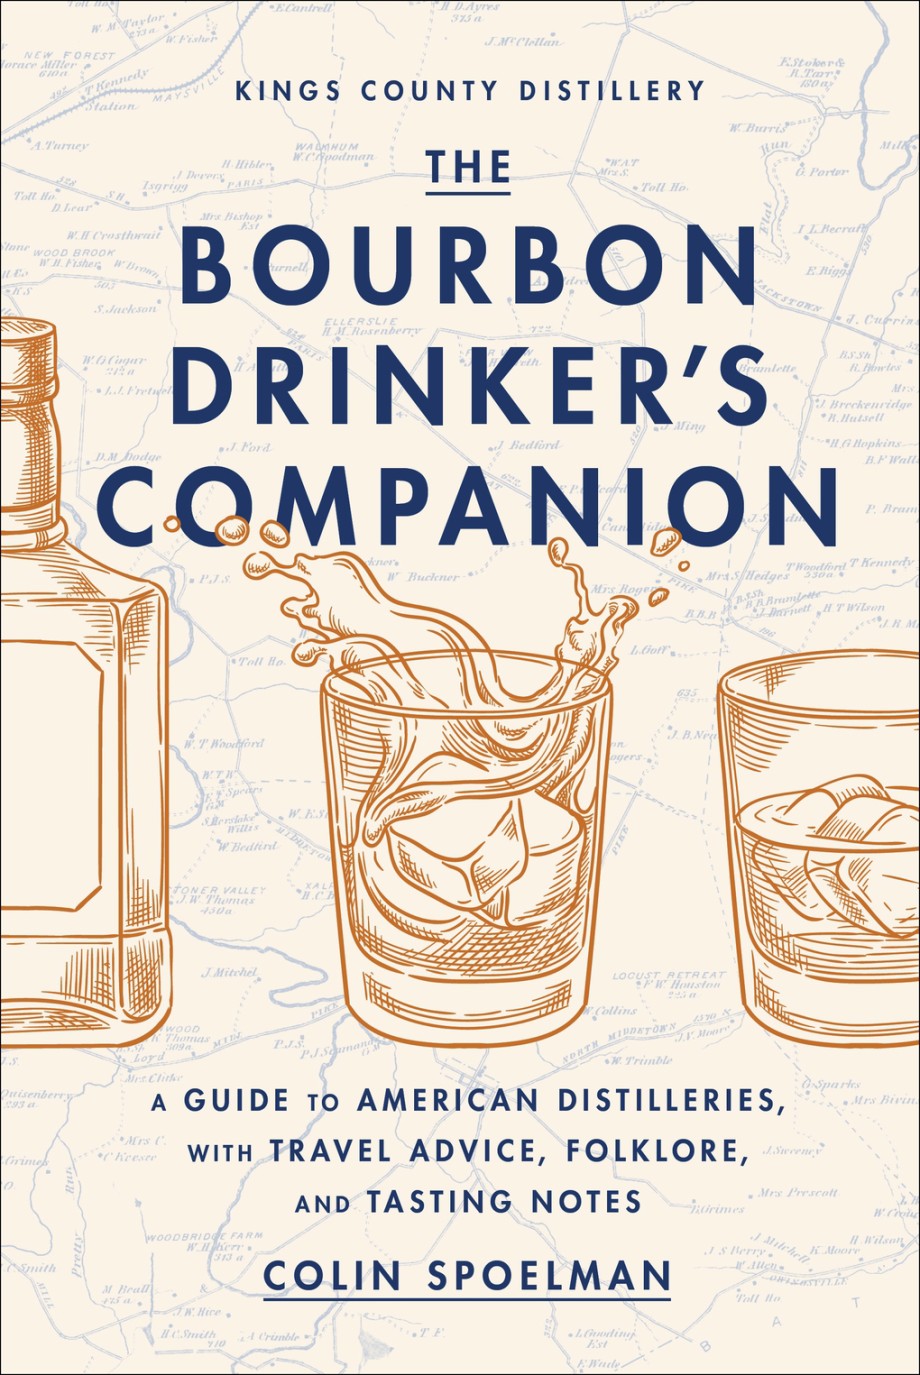 Bourbon Drinker's Companion A Guide to American Distilleries, with Travel Advice, Folklore, and Tasting Notes